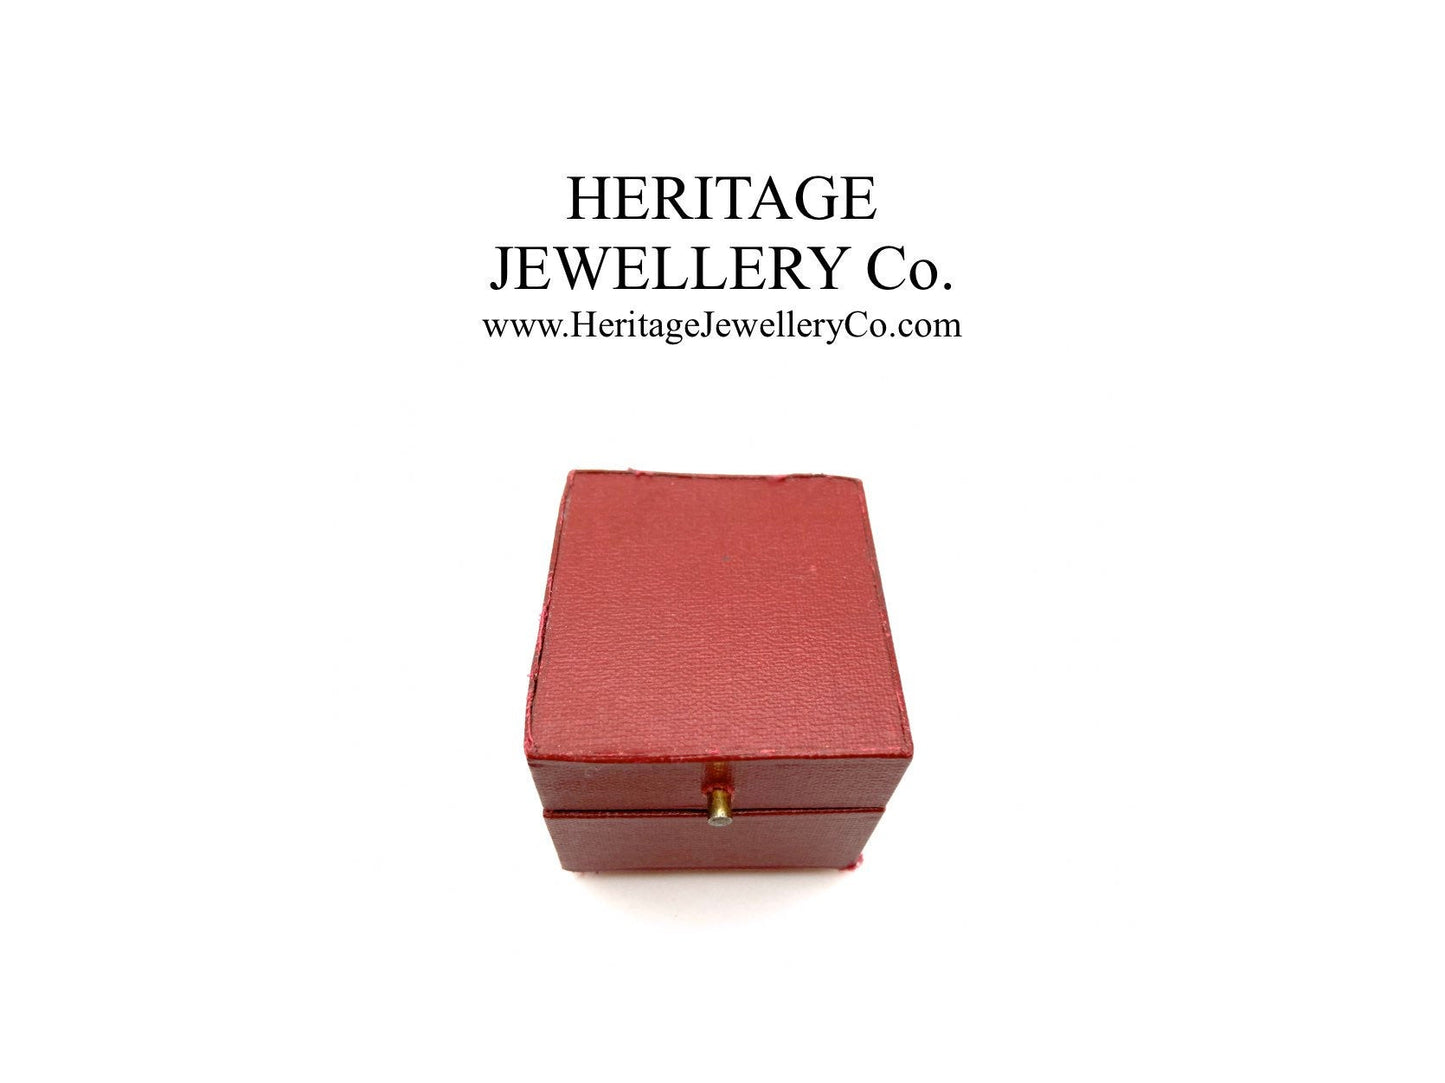 Vintage Tooled Leather Ring Box with Gold Trim